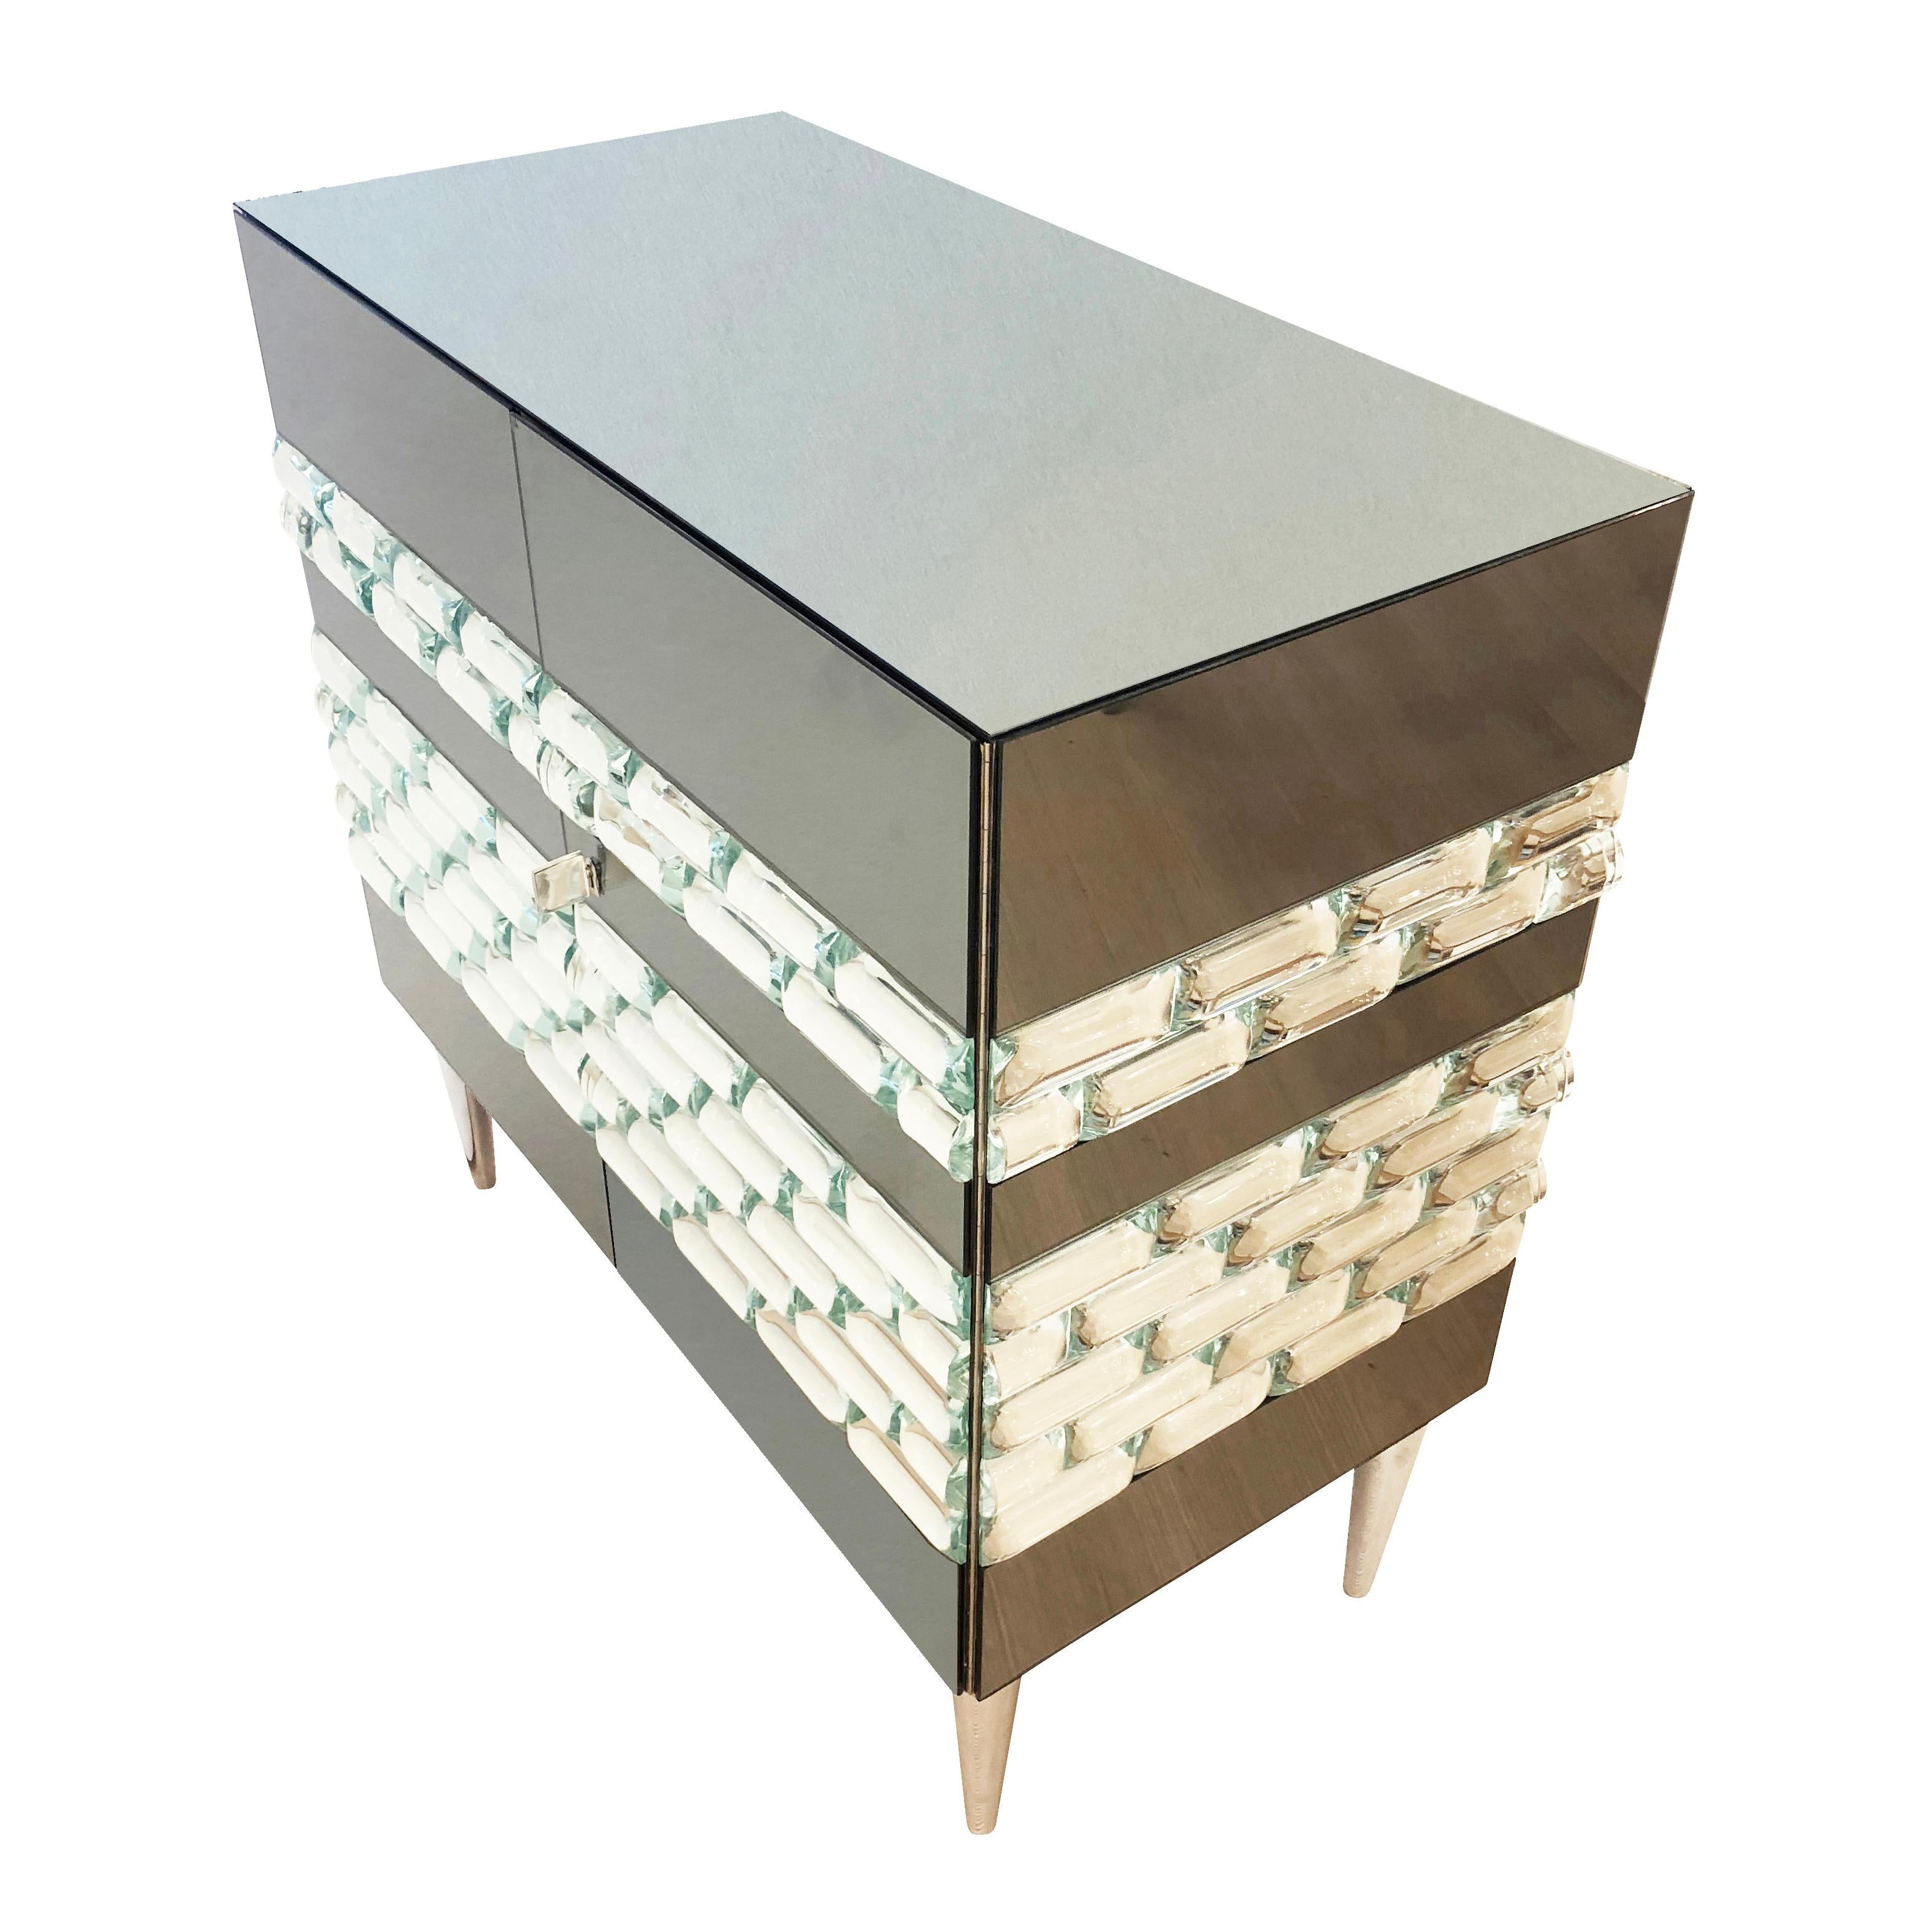 The sumptuous Nebula cabinet features gray mirrored glass paneling with hand carved starphire glass tiles.  Hardware is nickel. This is a special price for the last floor model-Original price was $9,900.00.

Width: 32”

Depth: 16”

Height: